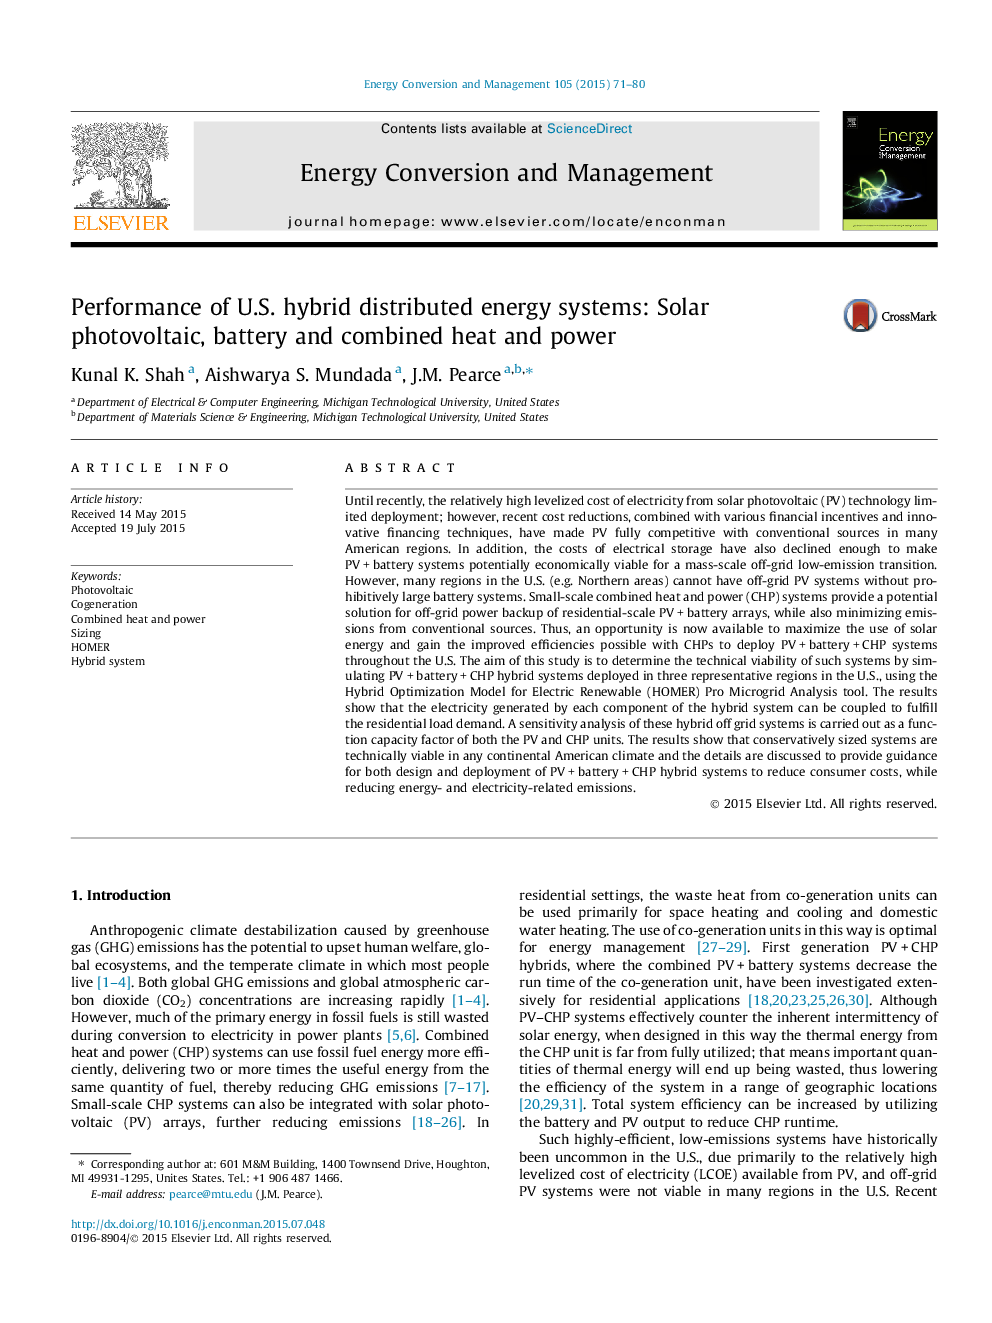 Performance of U.S. hybrid distributed energy systems: Solar photovoltaic, battery and combined heat and power